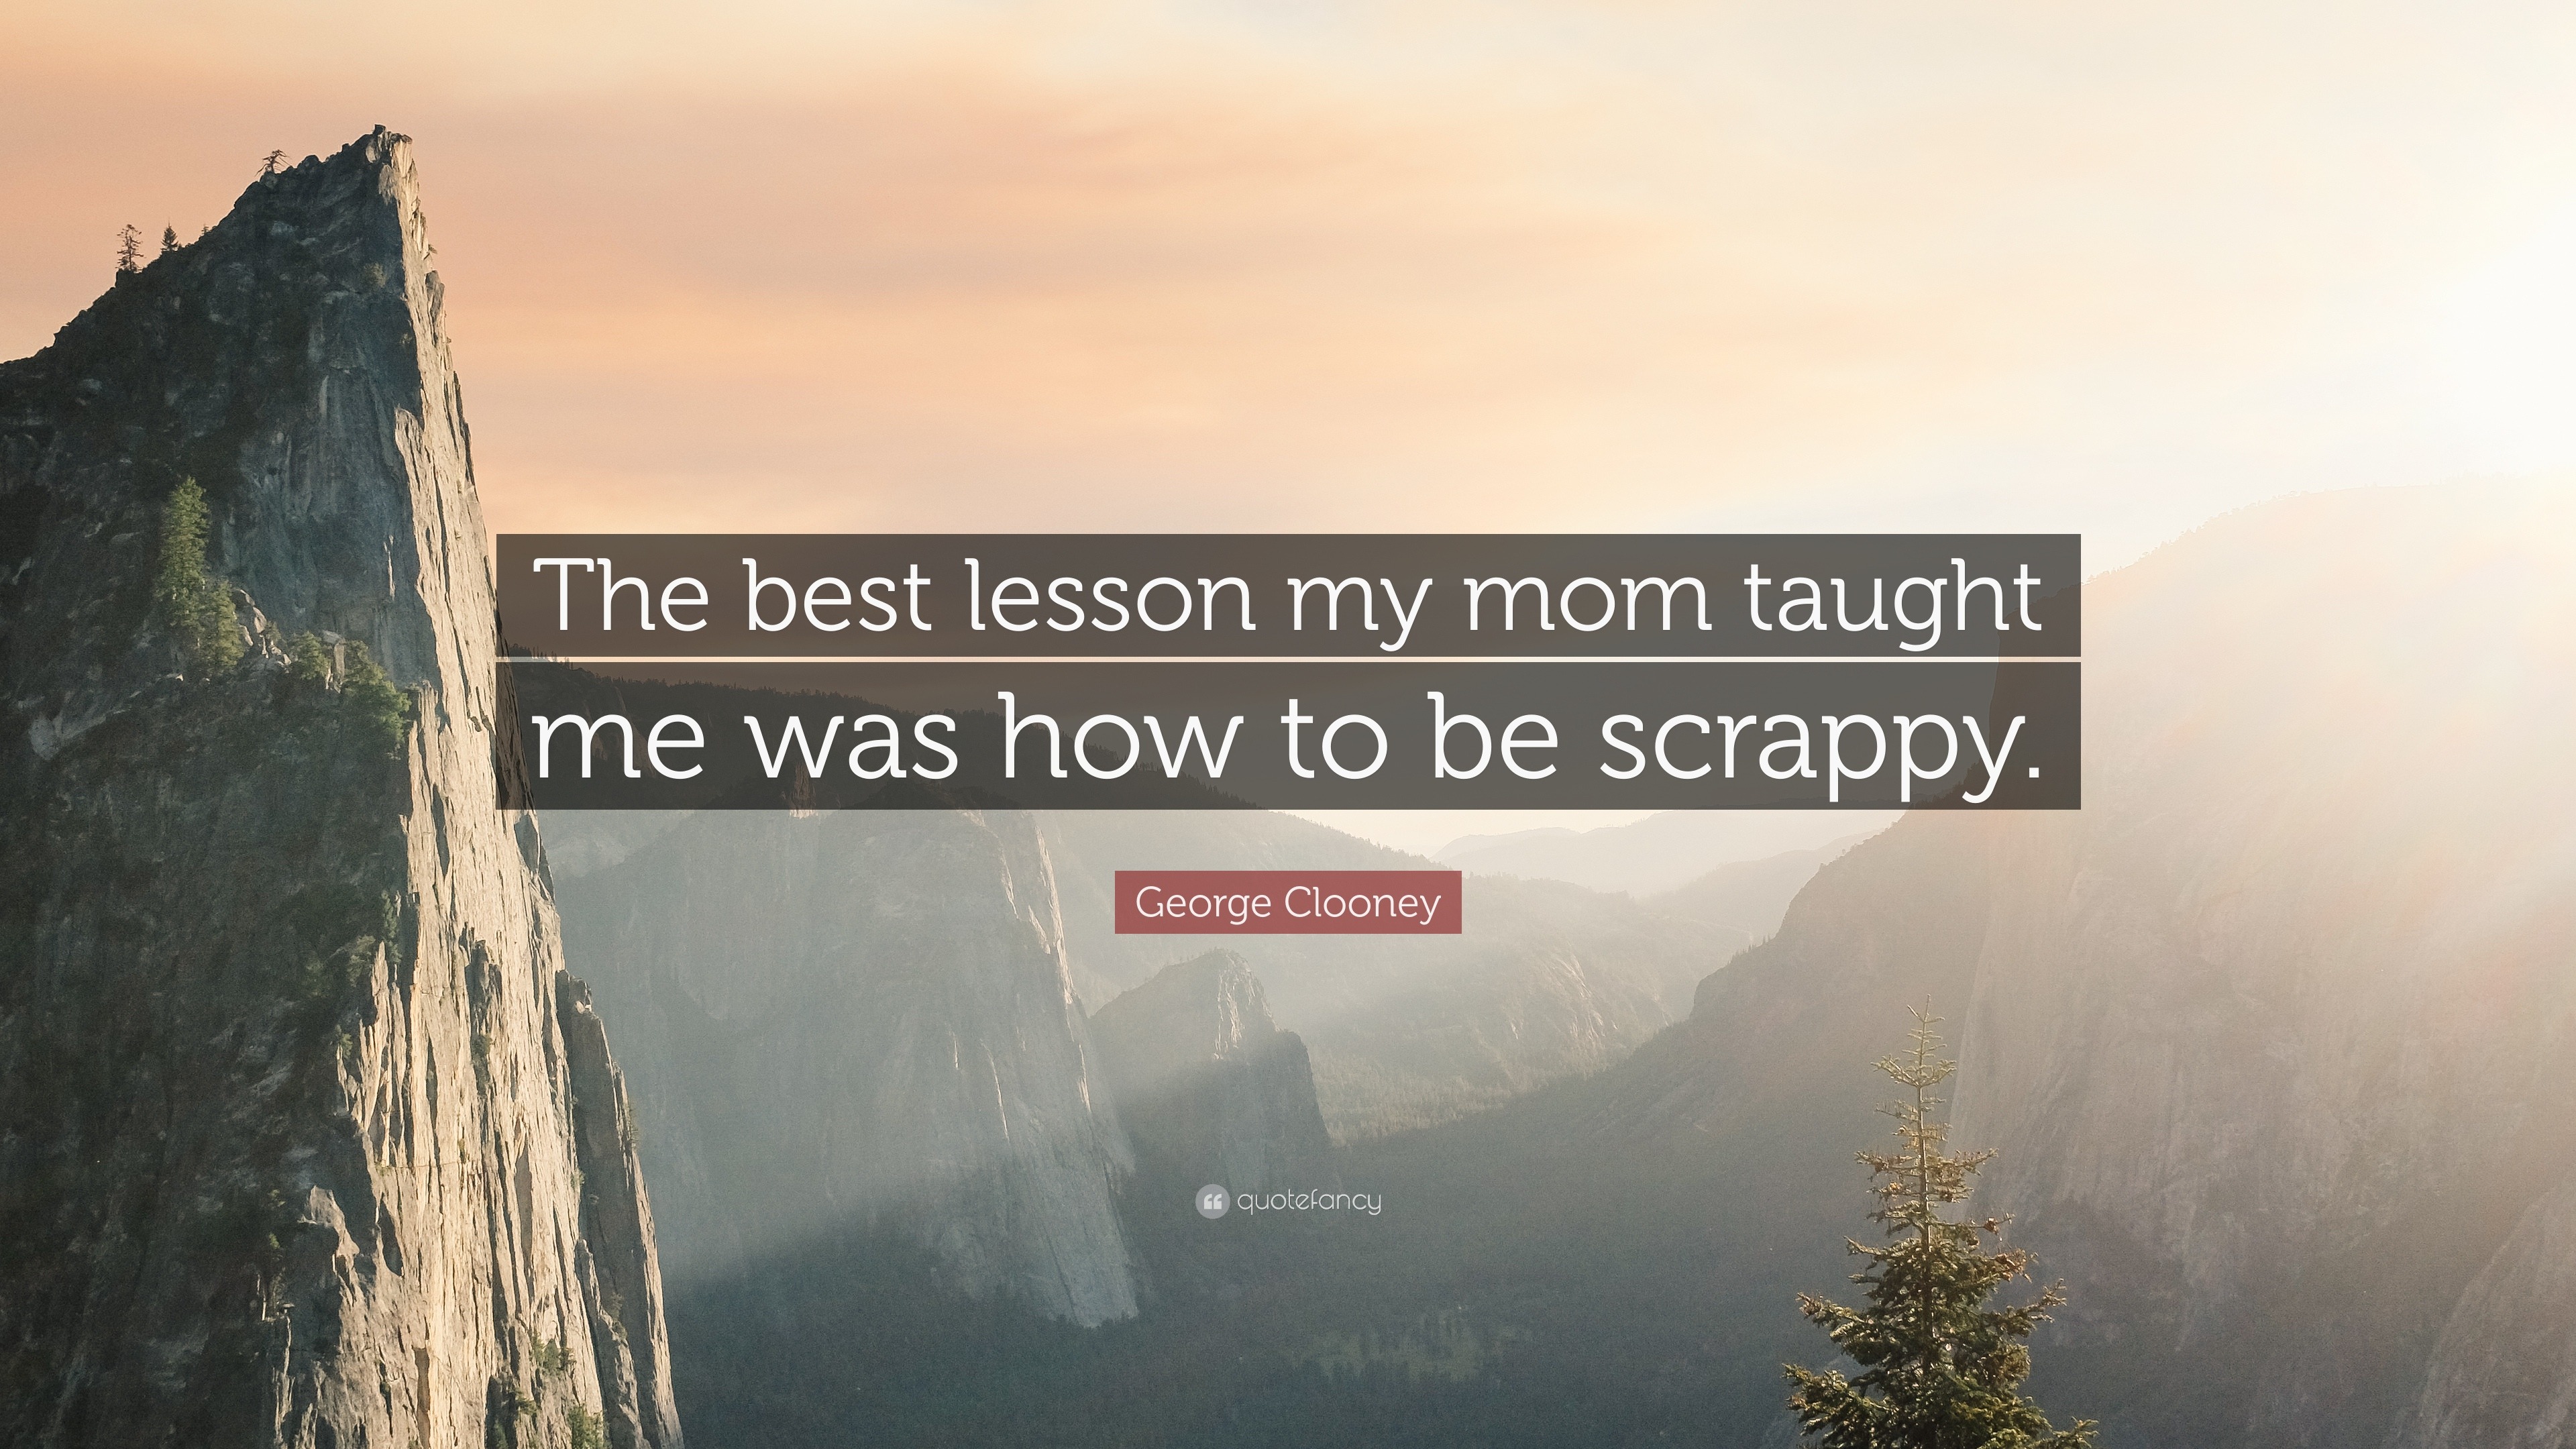 Spend Like My Mom Taught Me to Curse: Only When You Mean It - Good Life.  Better.